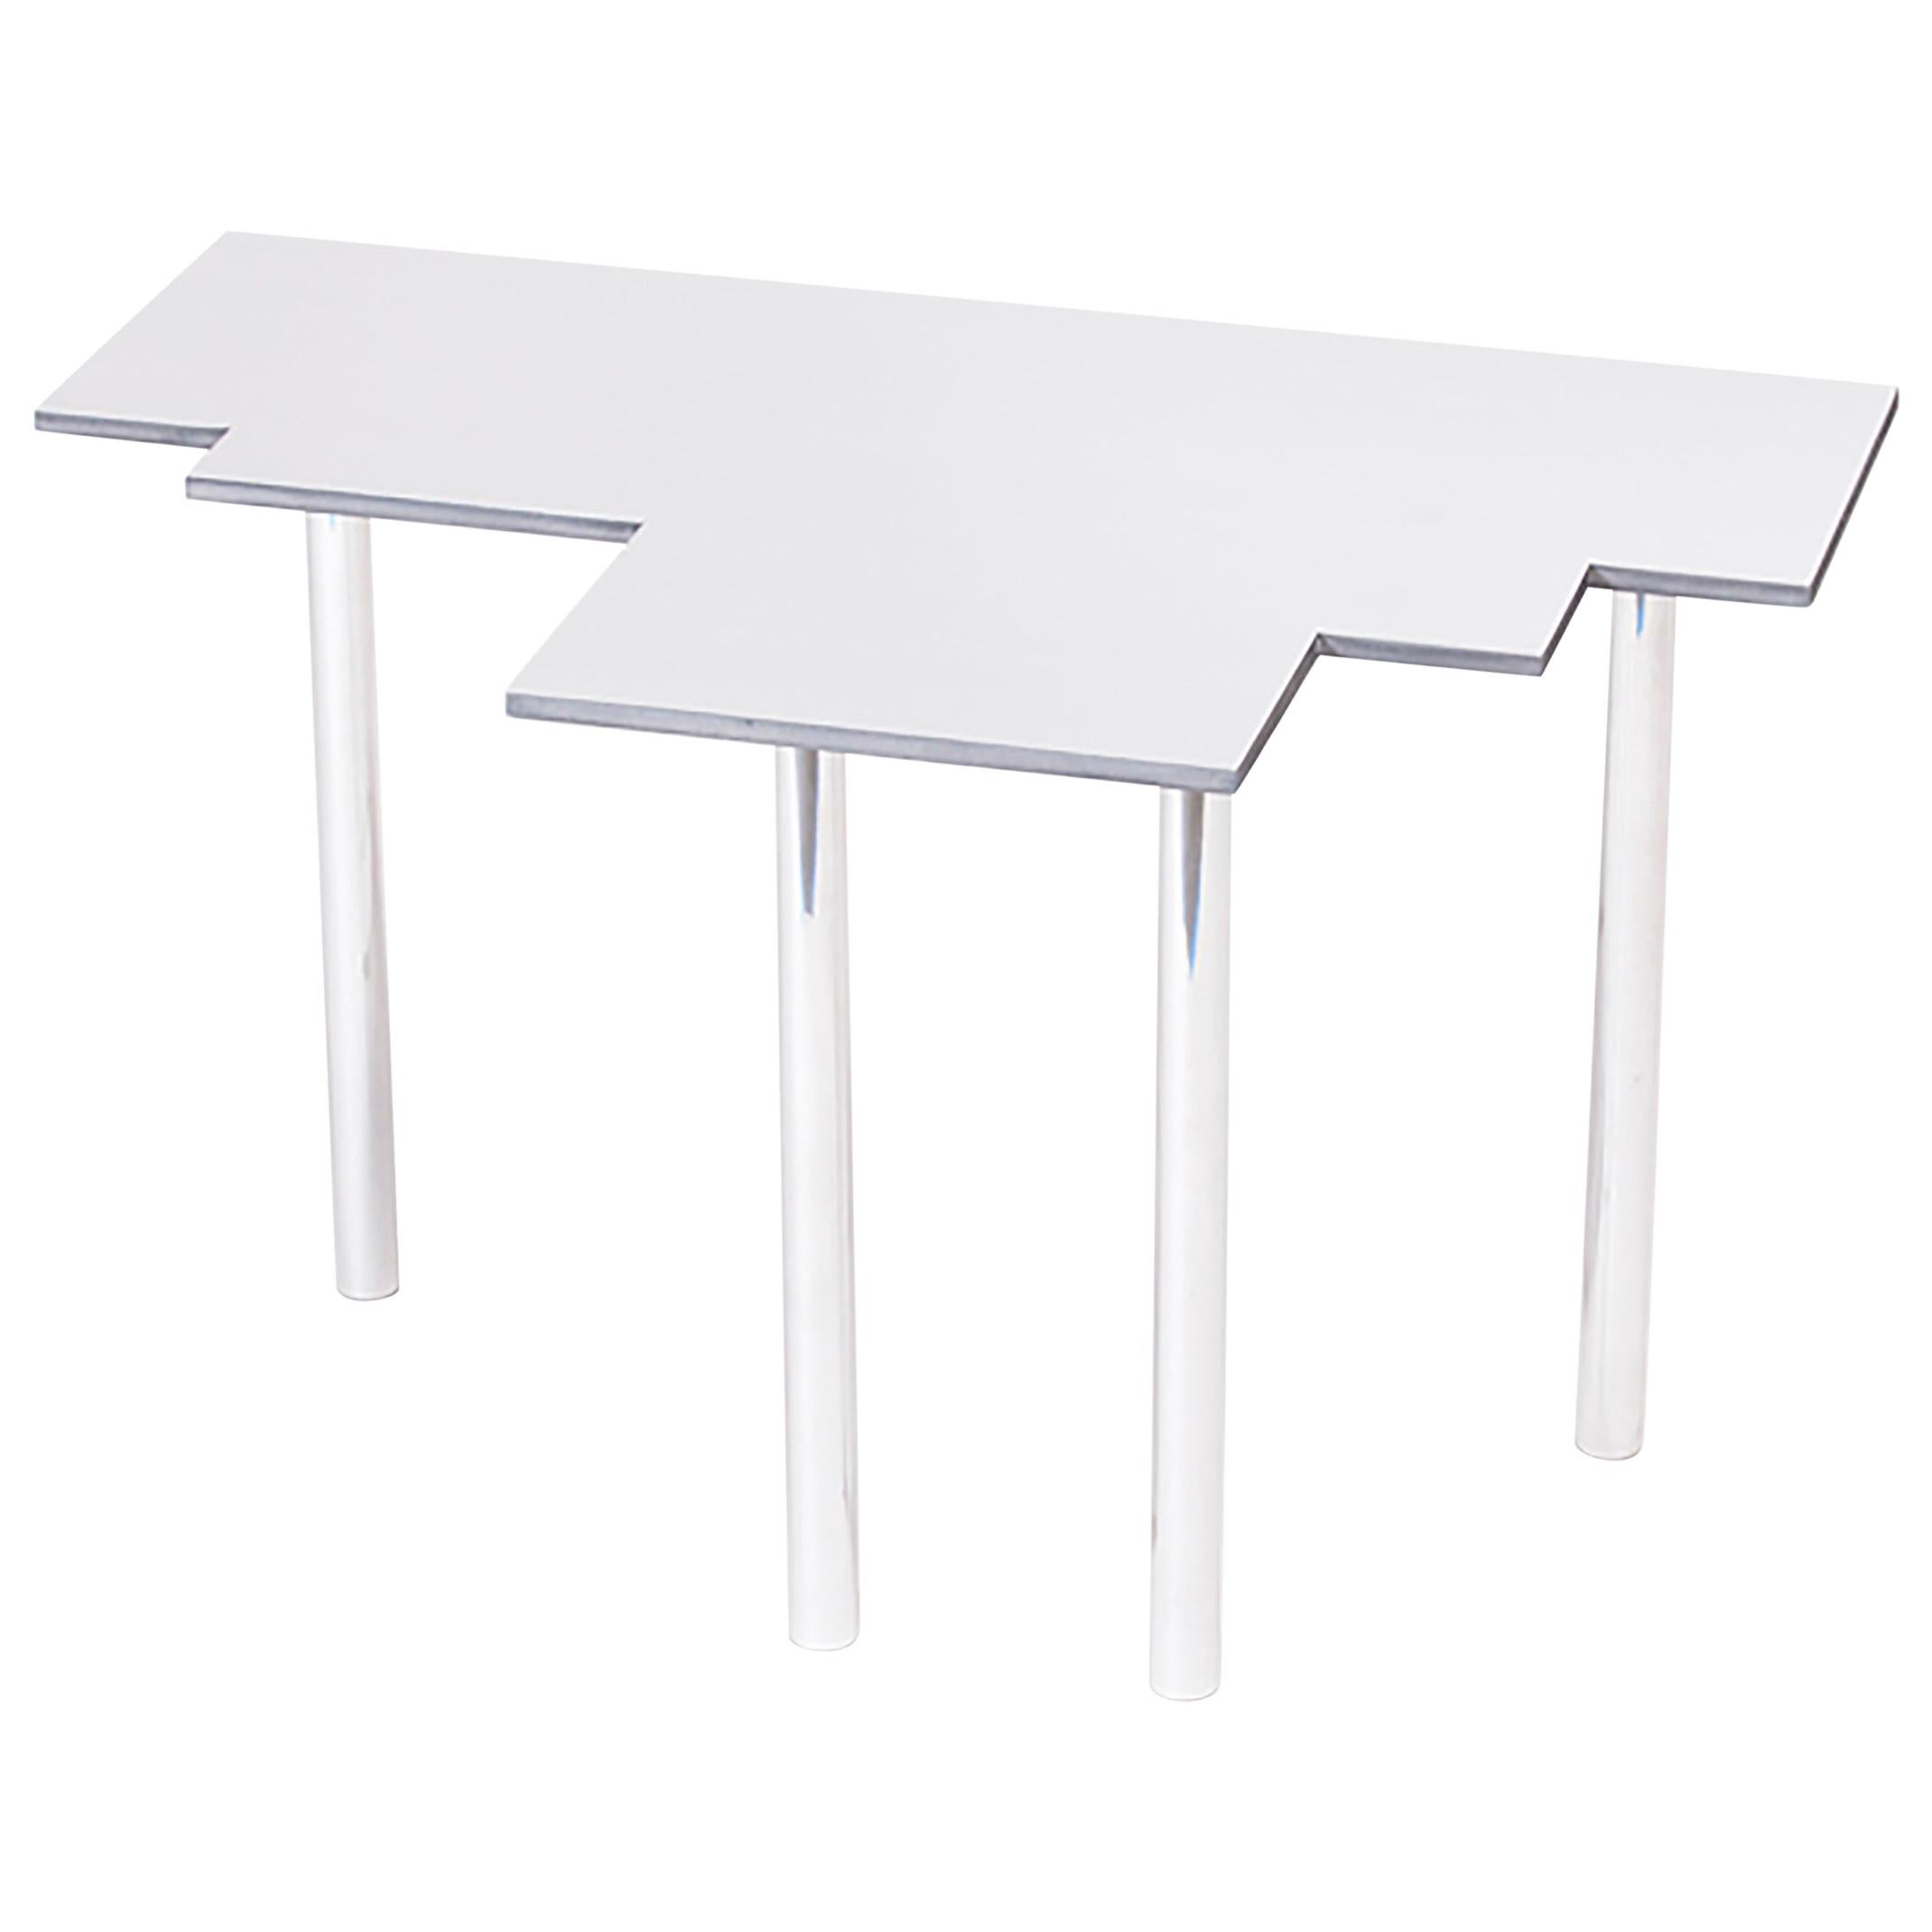 100 Variation Occasional Table in Mirror Polished Aluminum by Jonathan Nesci